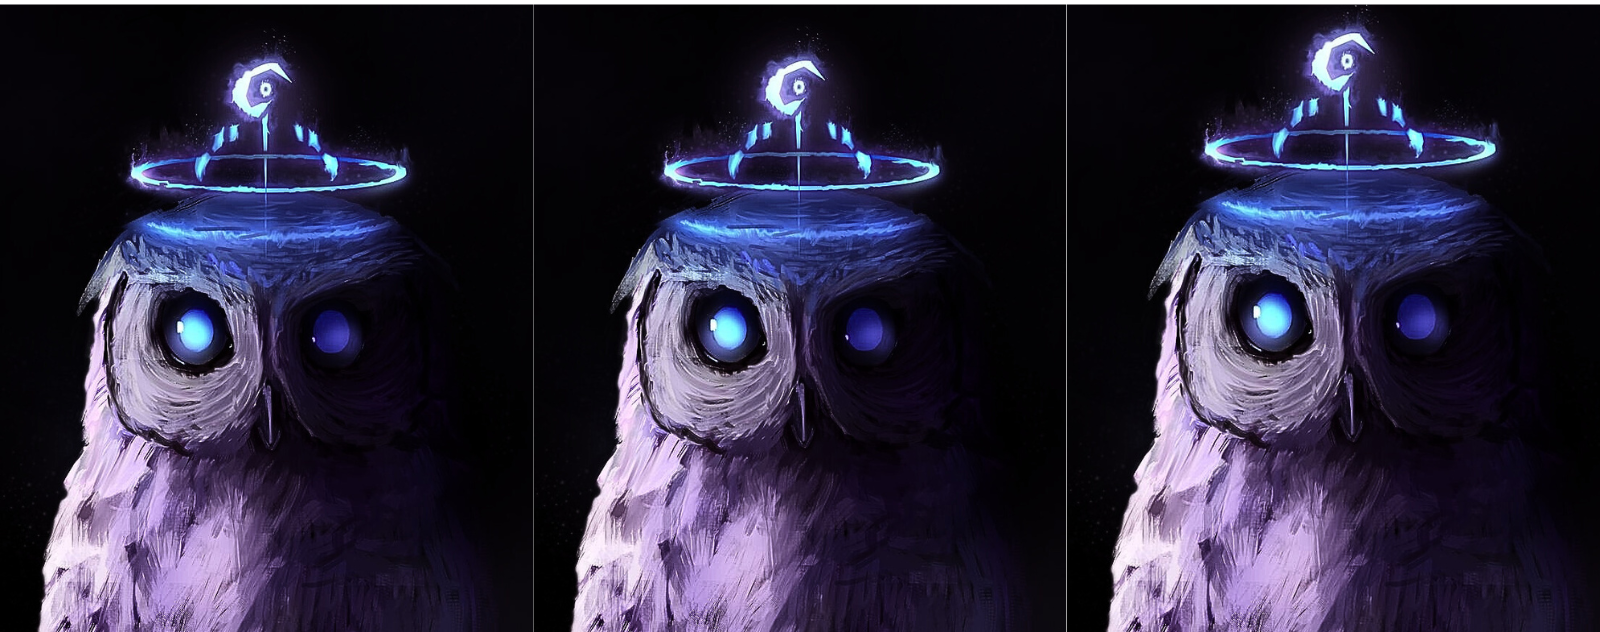 psychic_Owl_images